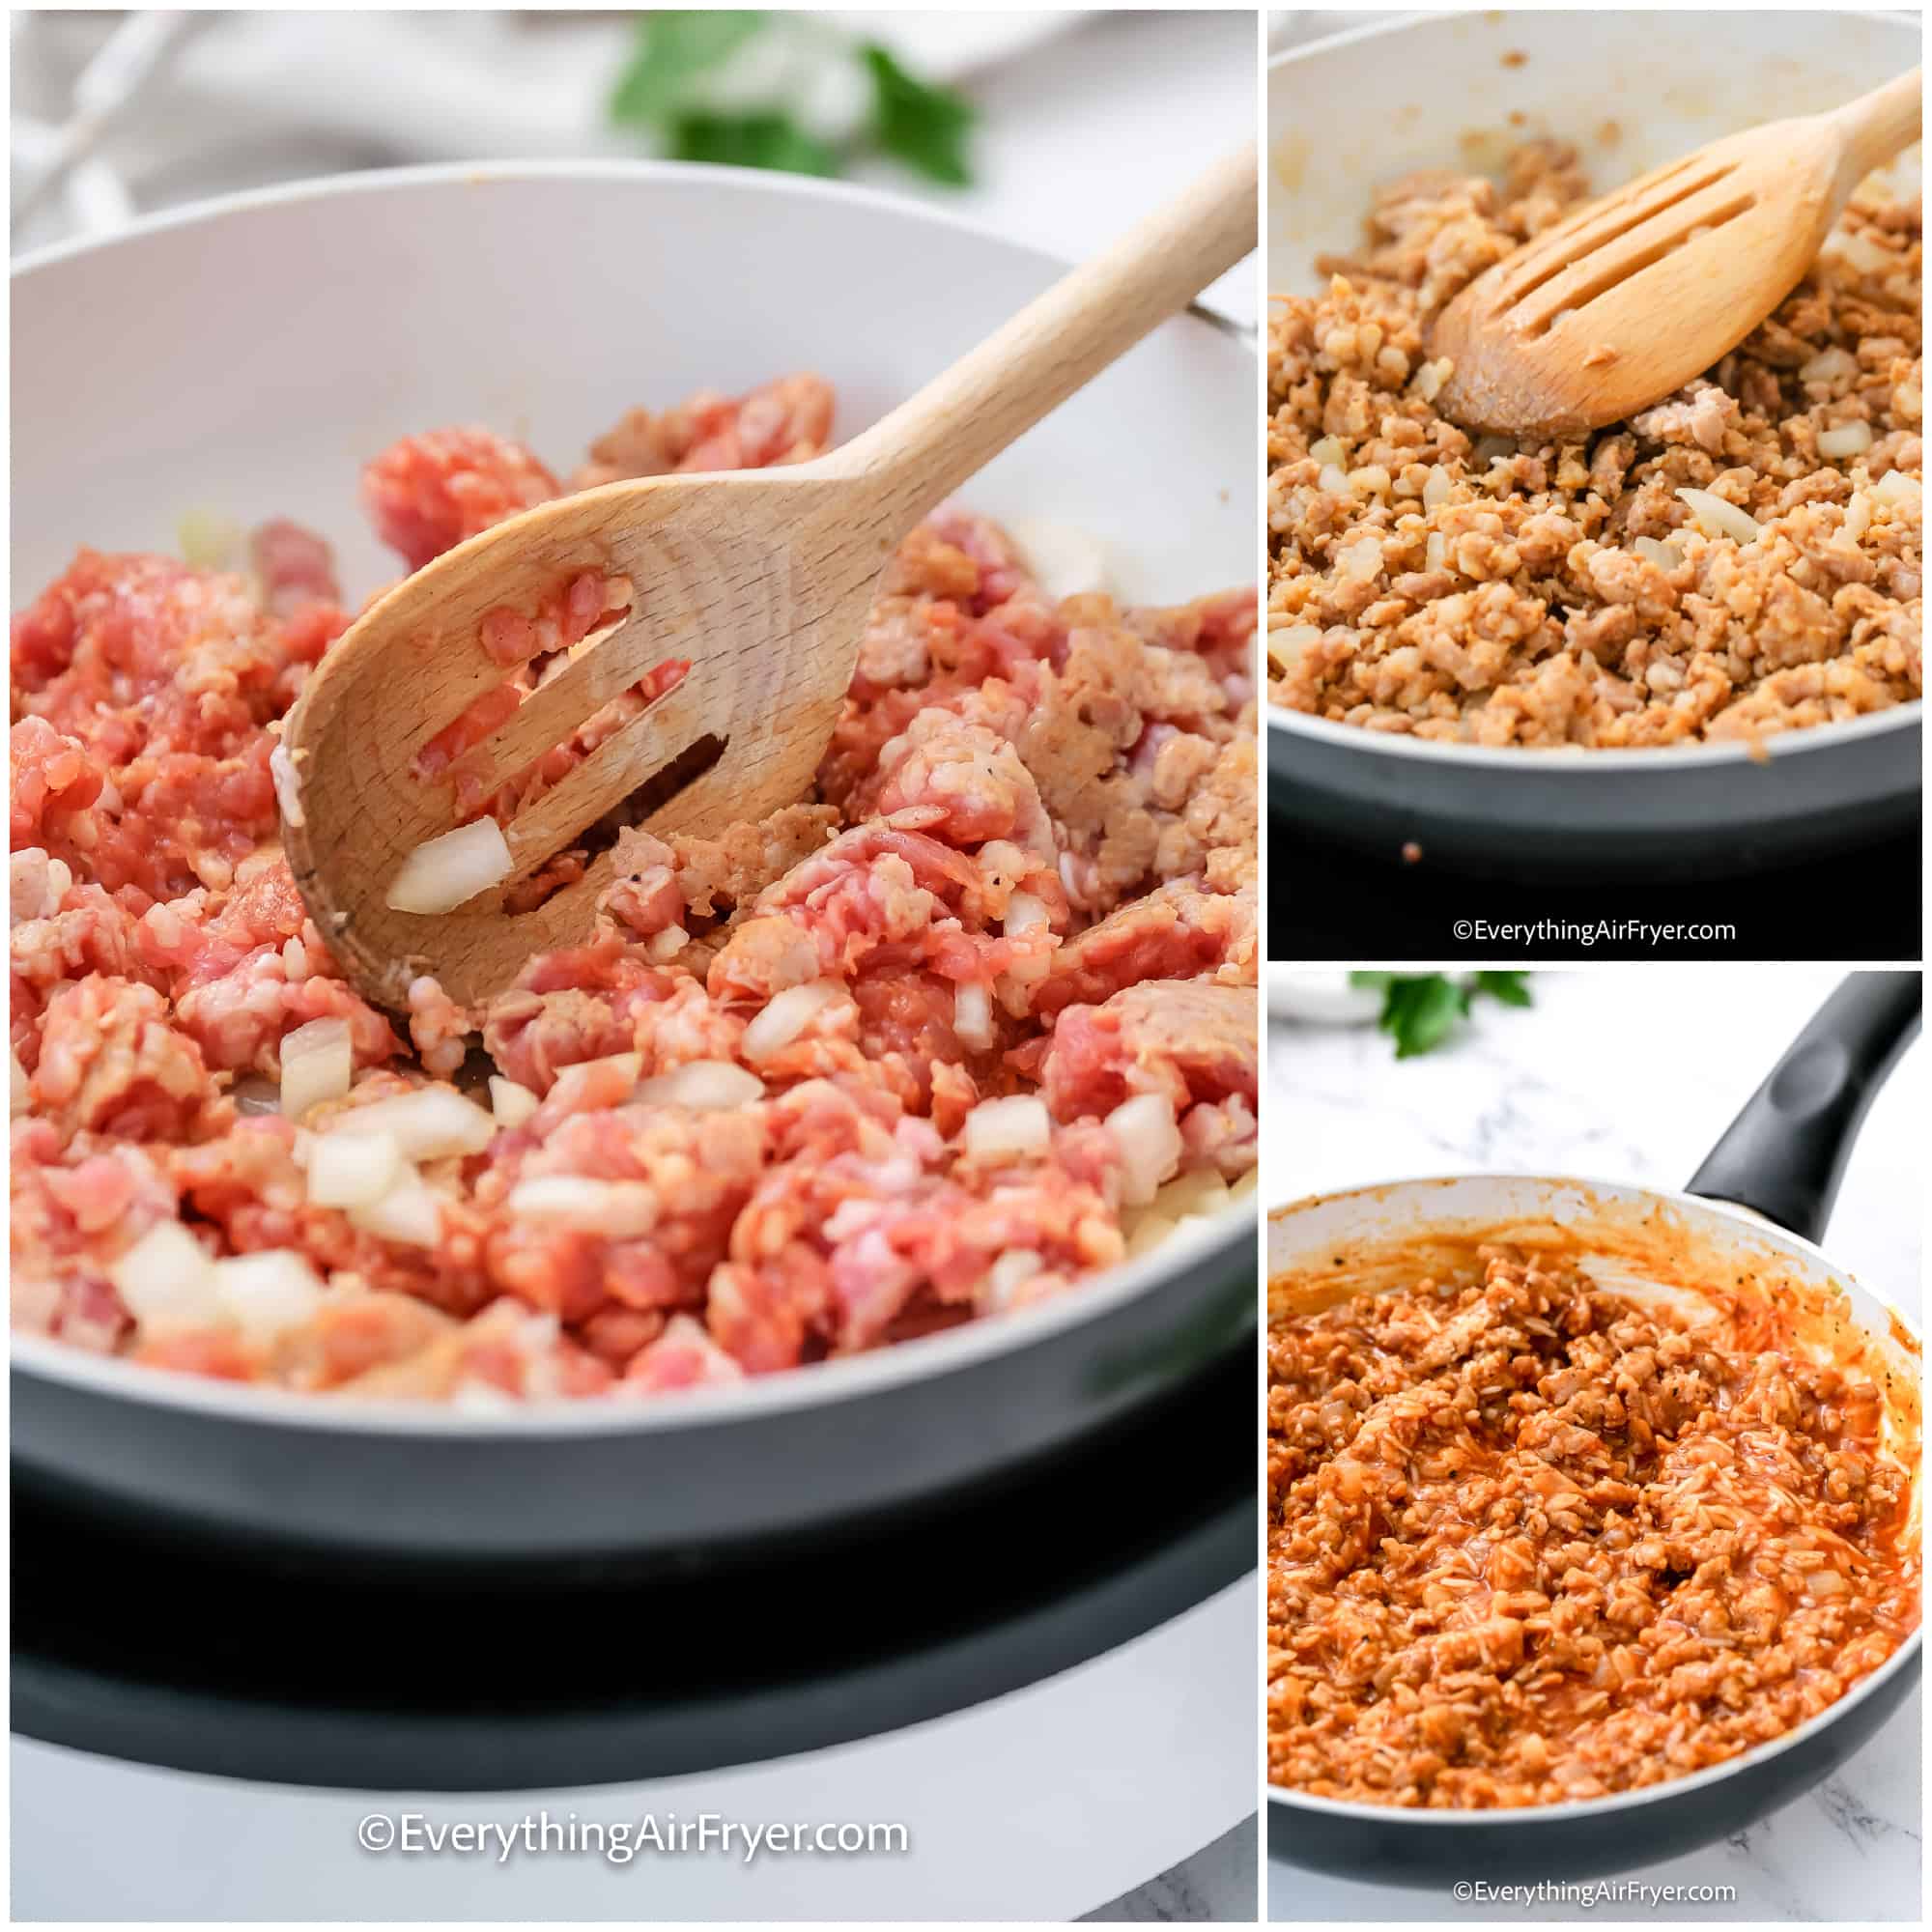 process of cooking stuffing for stuffed peppers